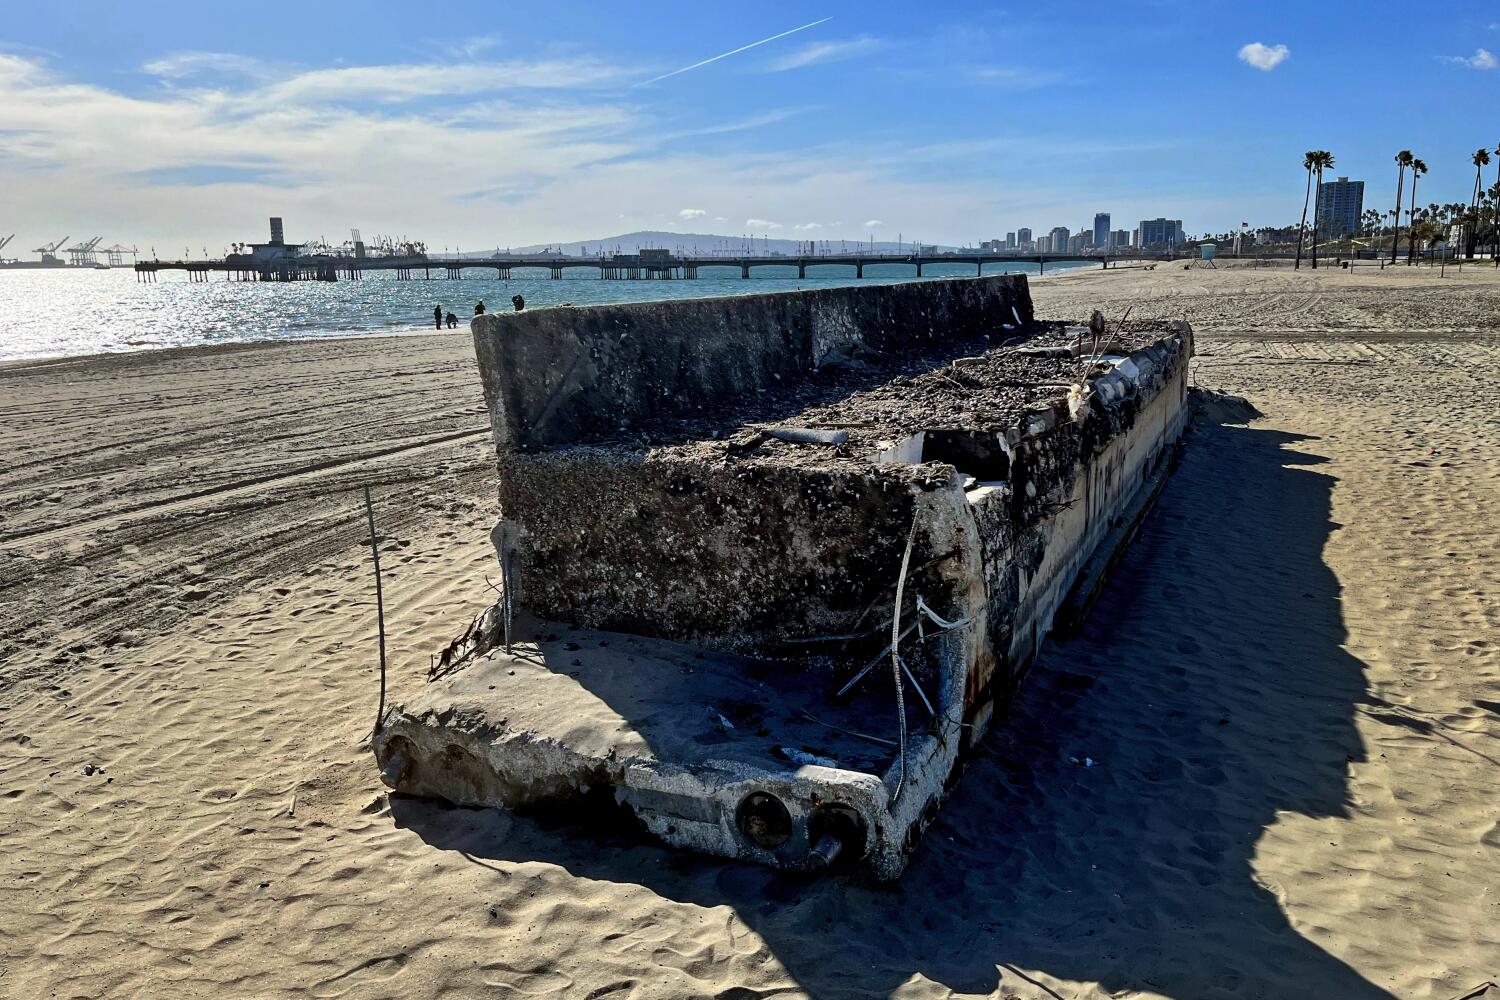 A bus-sized piece of concrete on the beach: A tale of waste, neglect and climate change